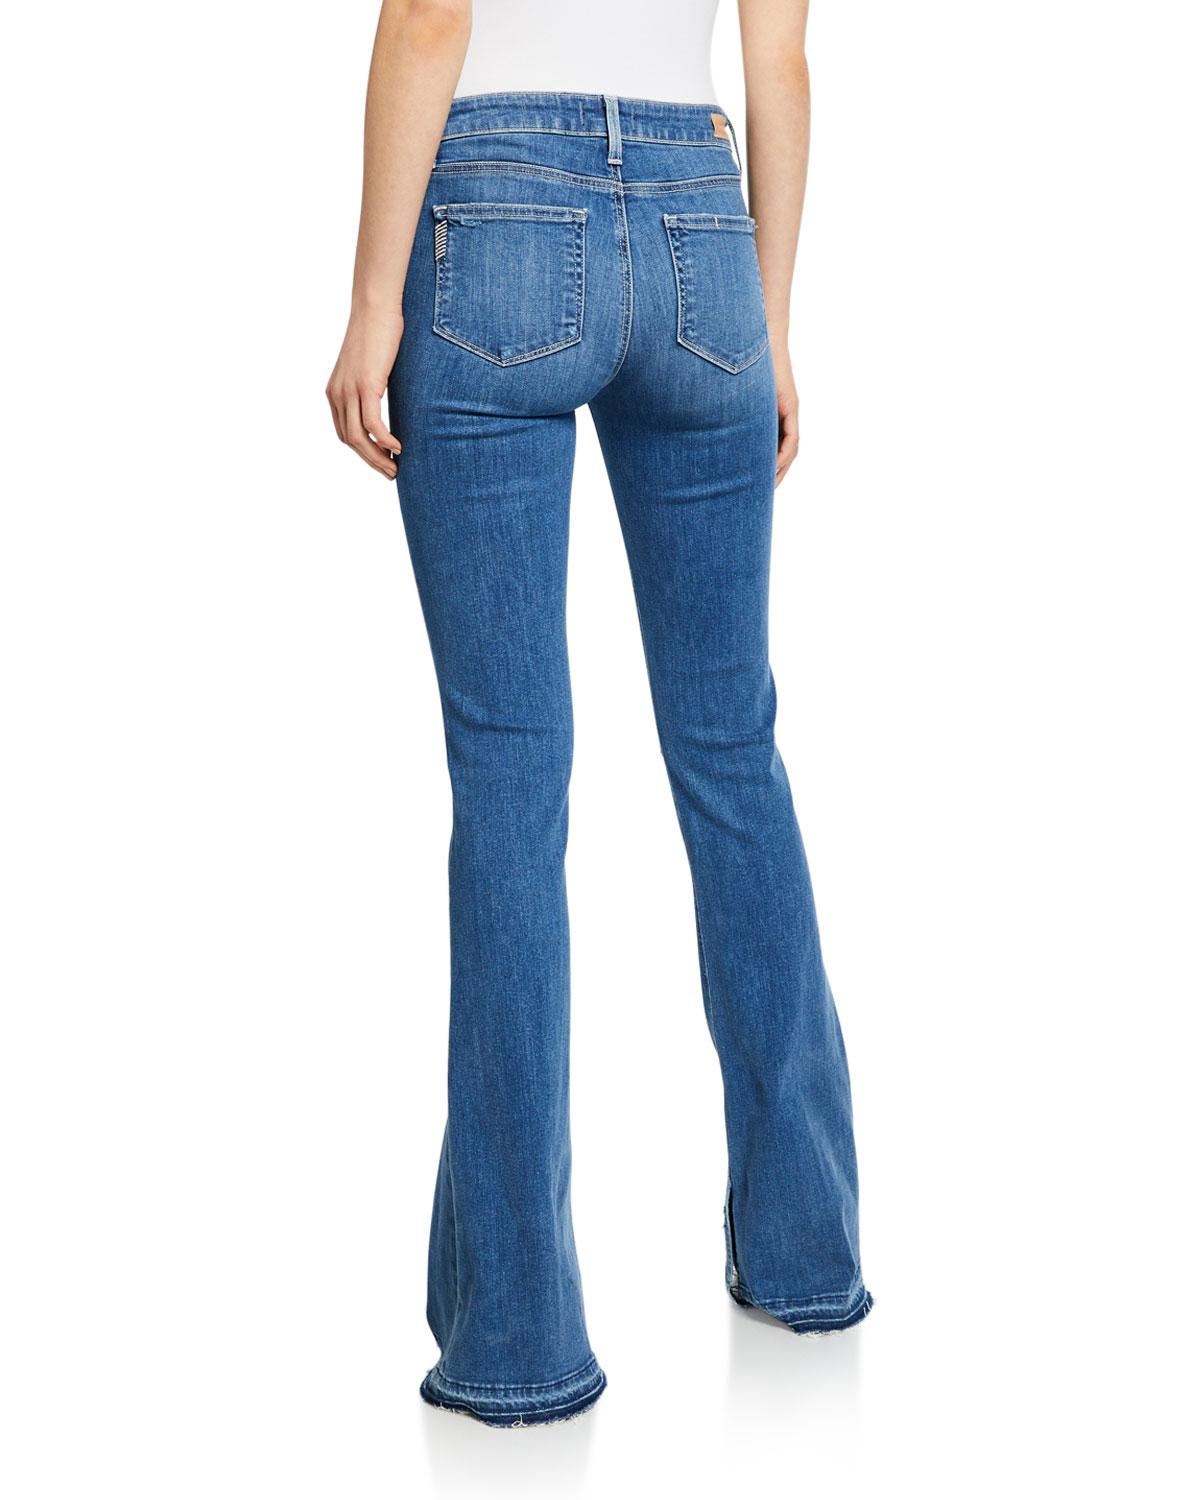 PAIGE Denim Lou Lou Flare Jeans With Released Hem in Blue - Lyst